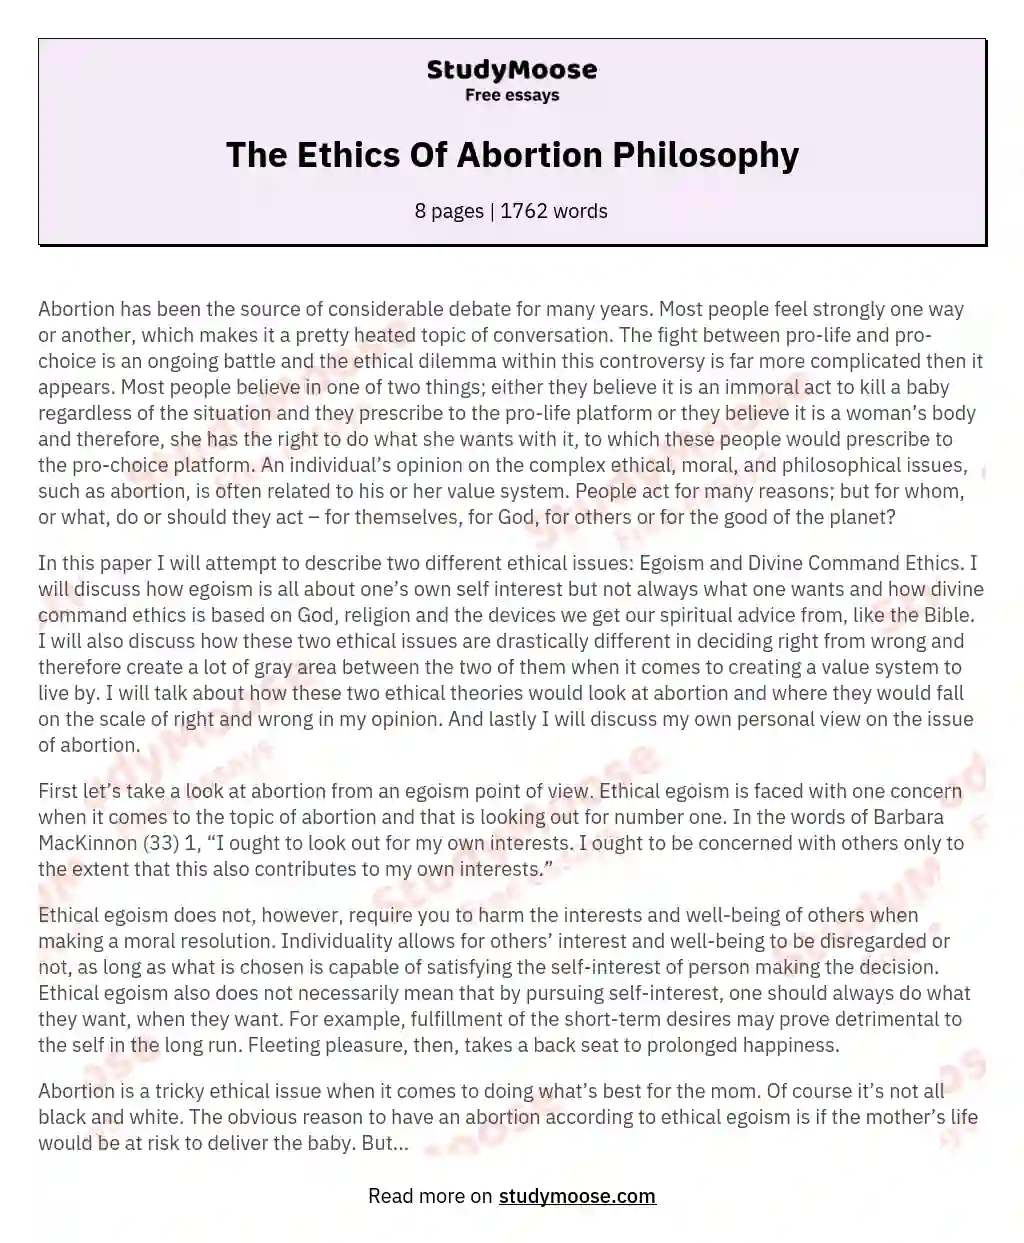 The Ethics Of Abortion Philosophy essay